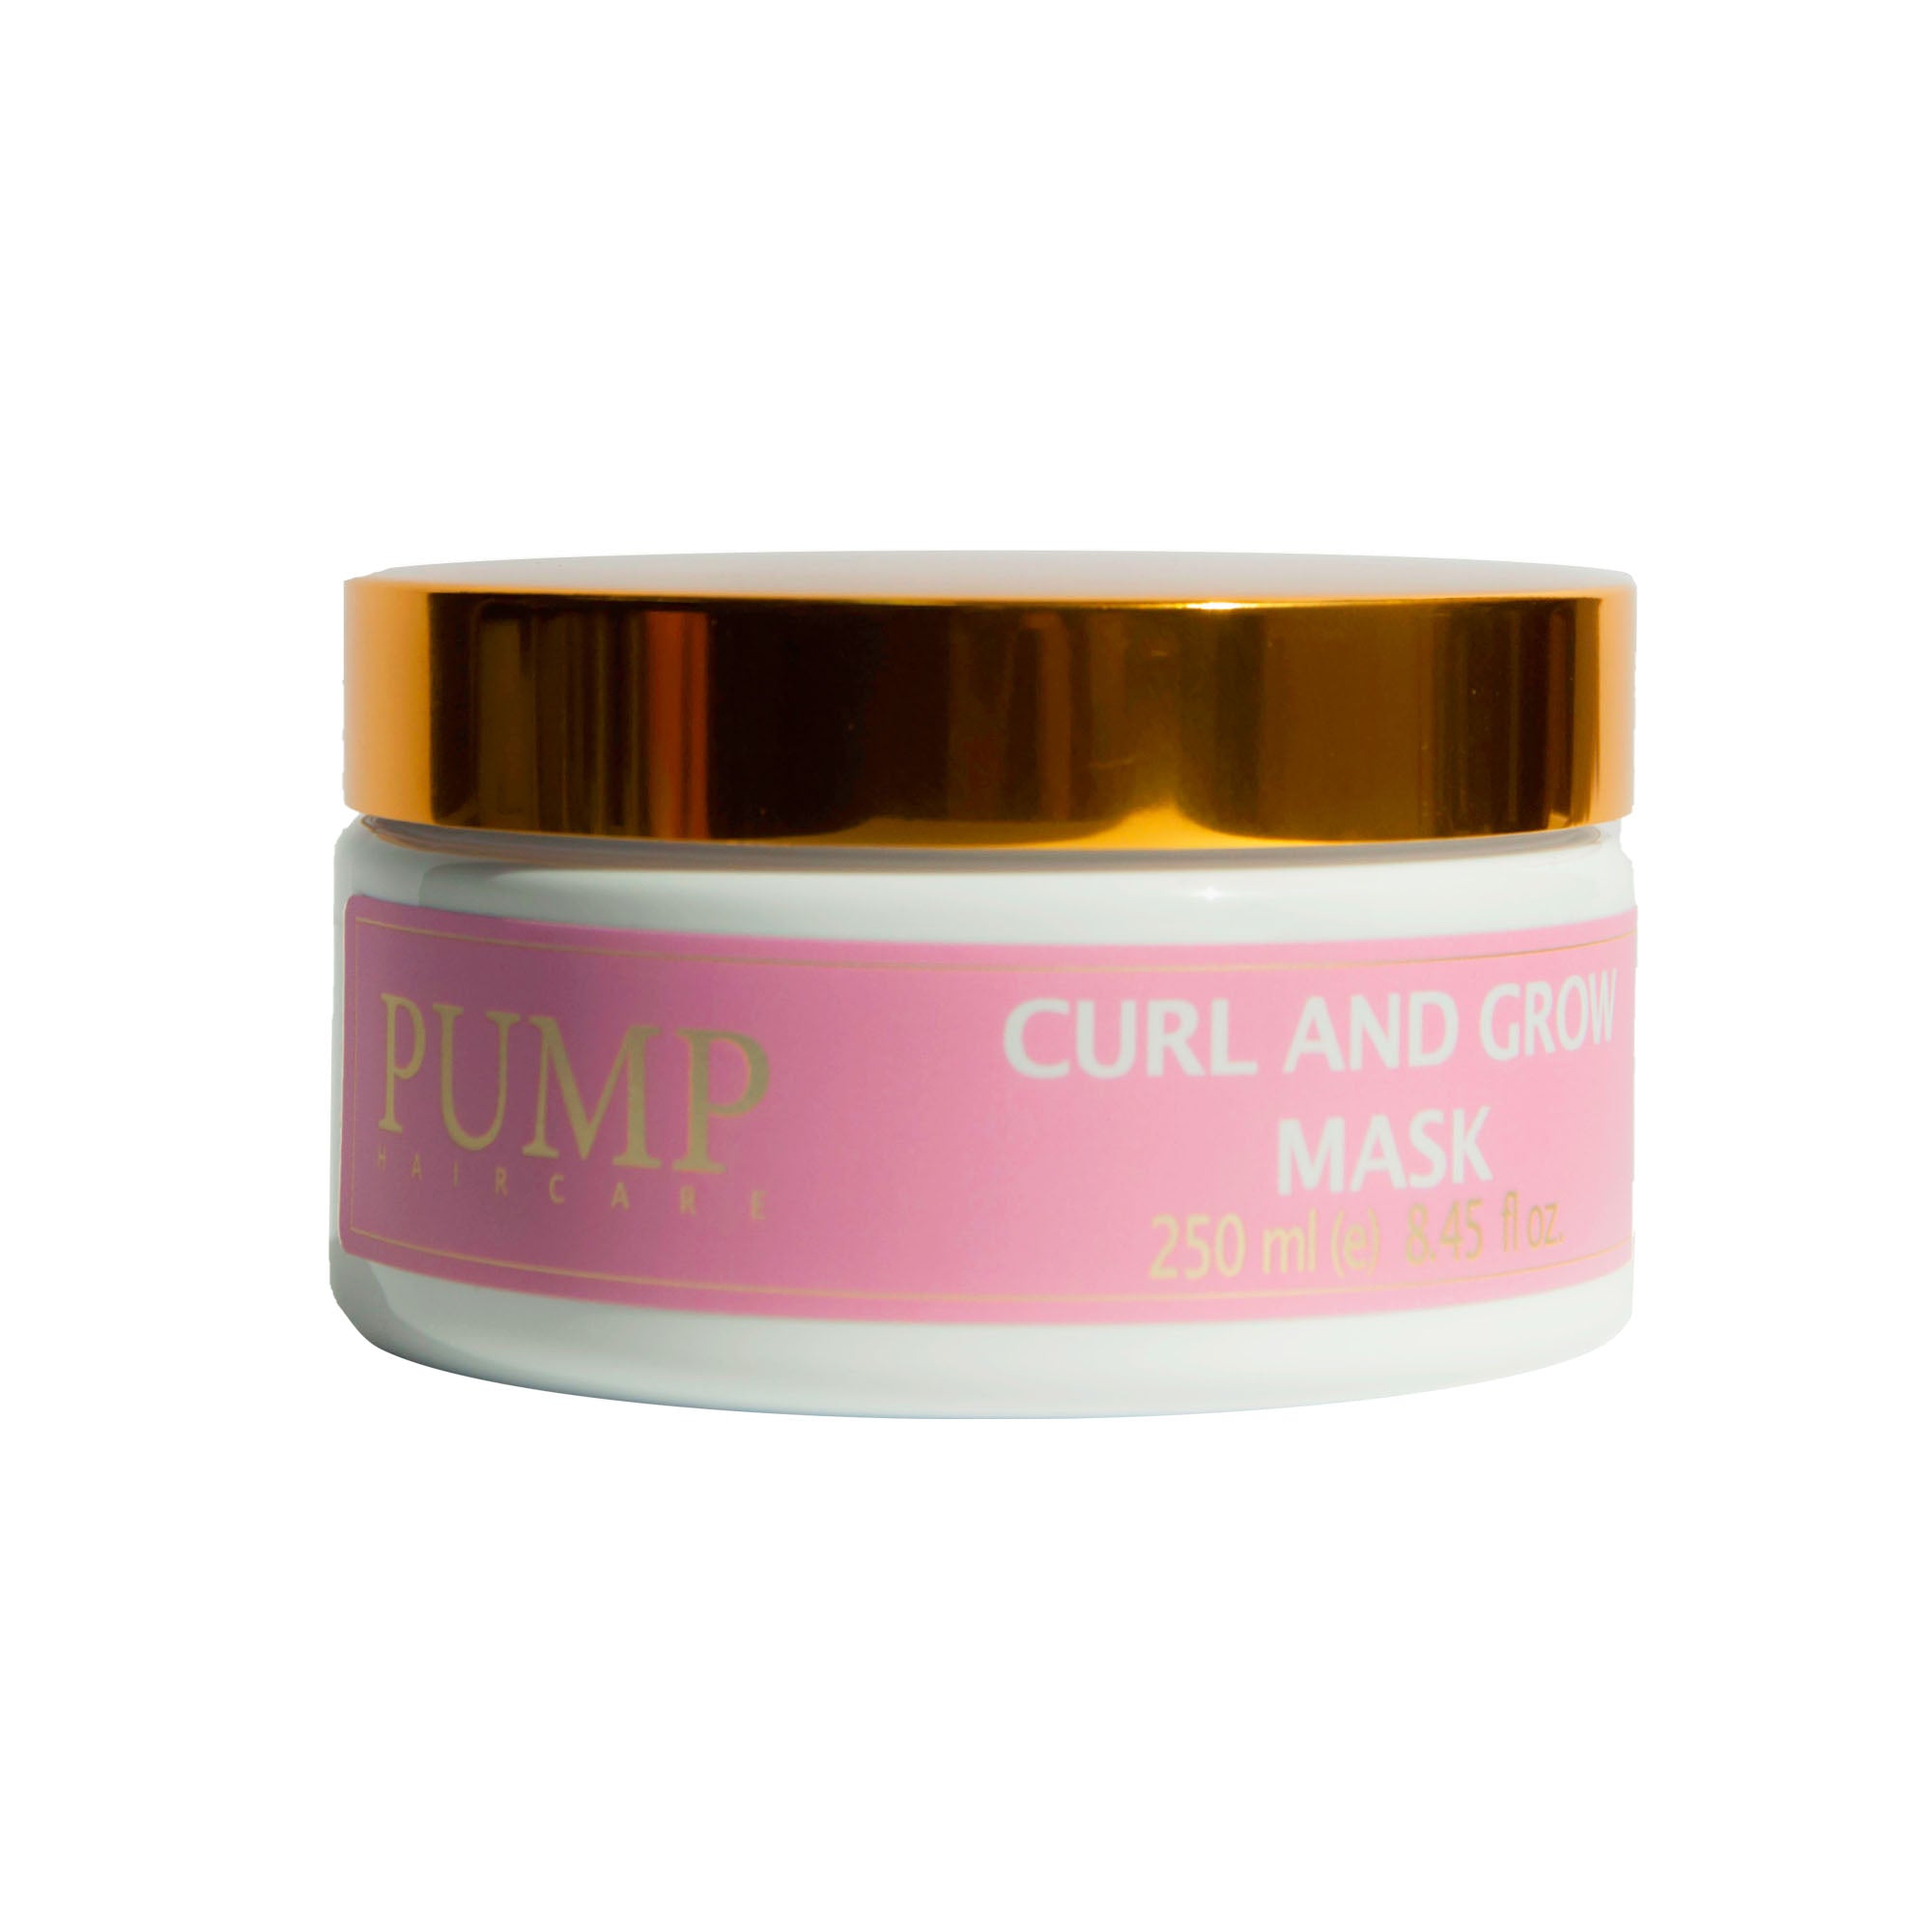 Pump Curl and Grow Mask 250ml